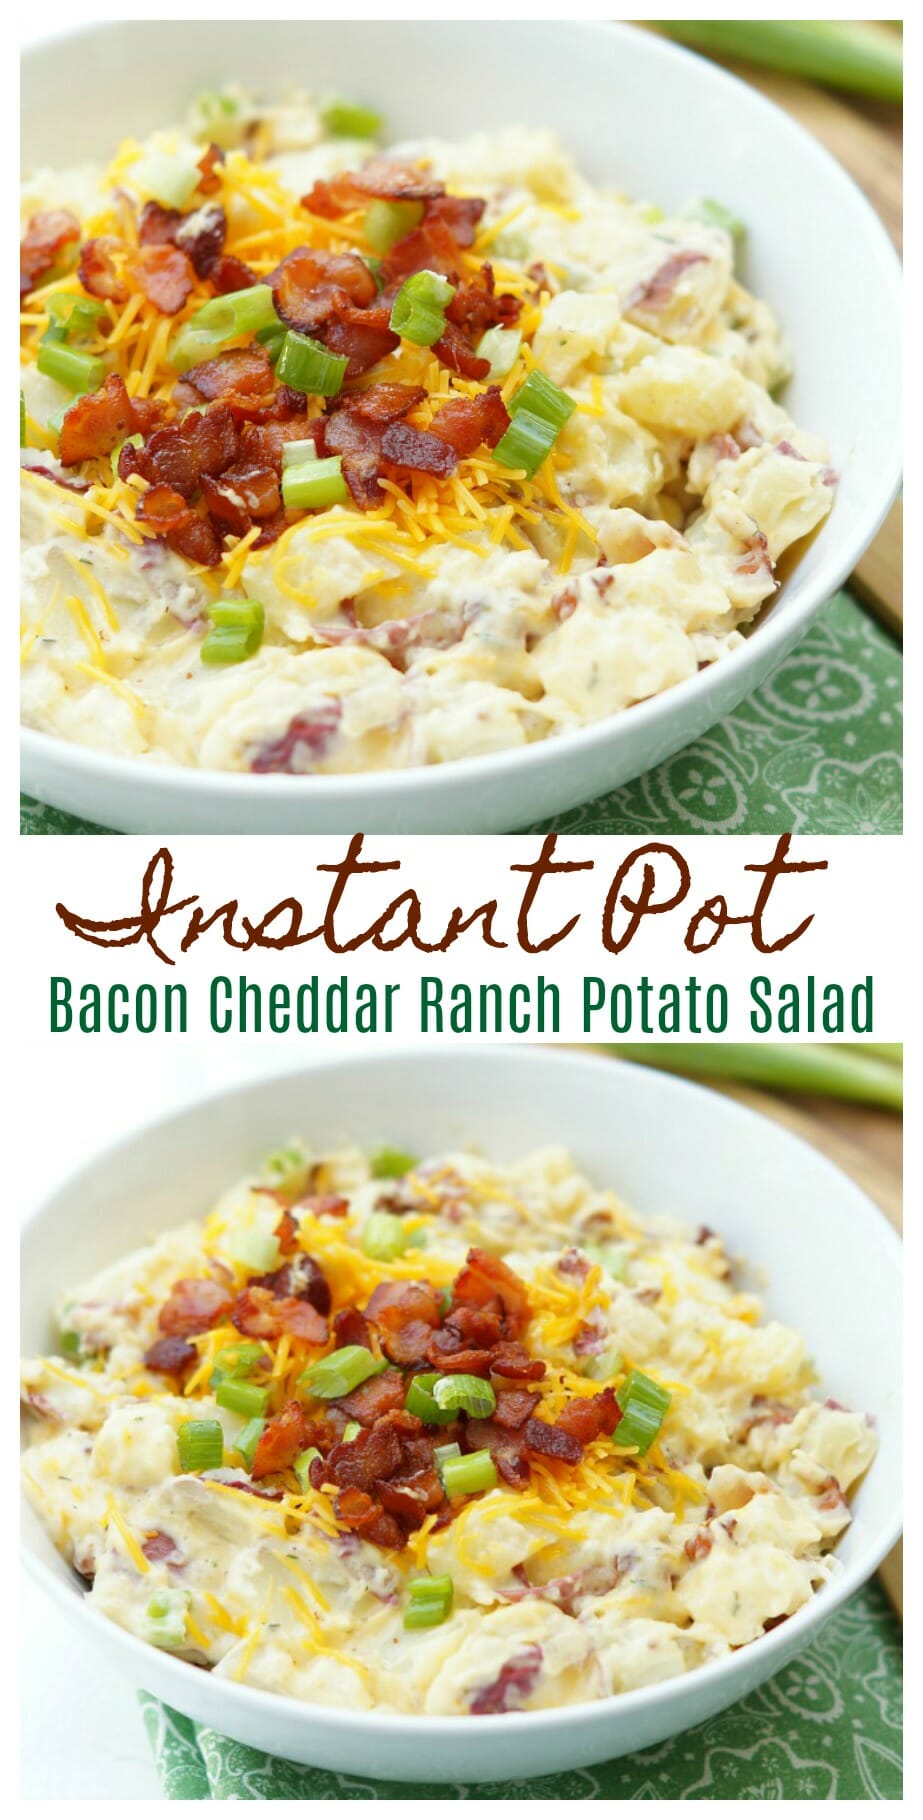 Instant Pot Bacon Cheddar Ranch Potato Salad. This easy side dish recipe will replace your traditional potato salad recipe!